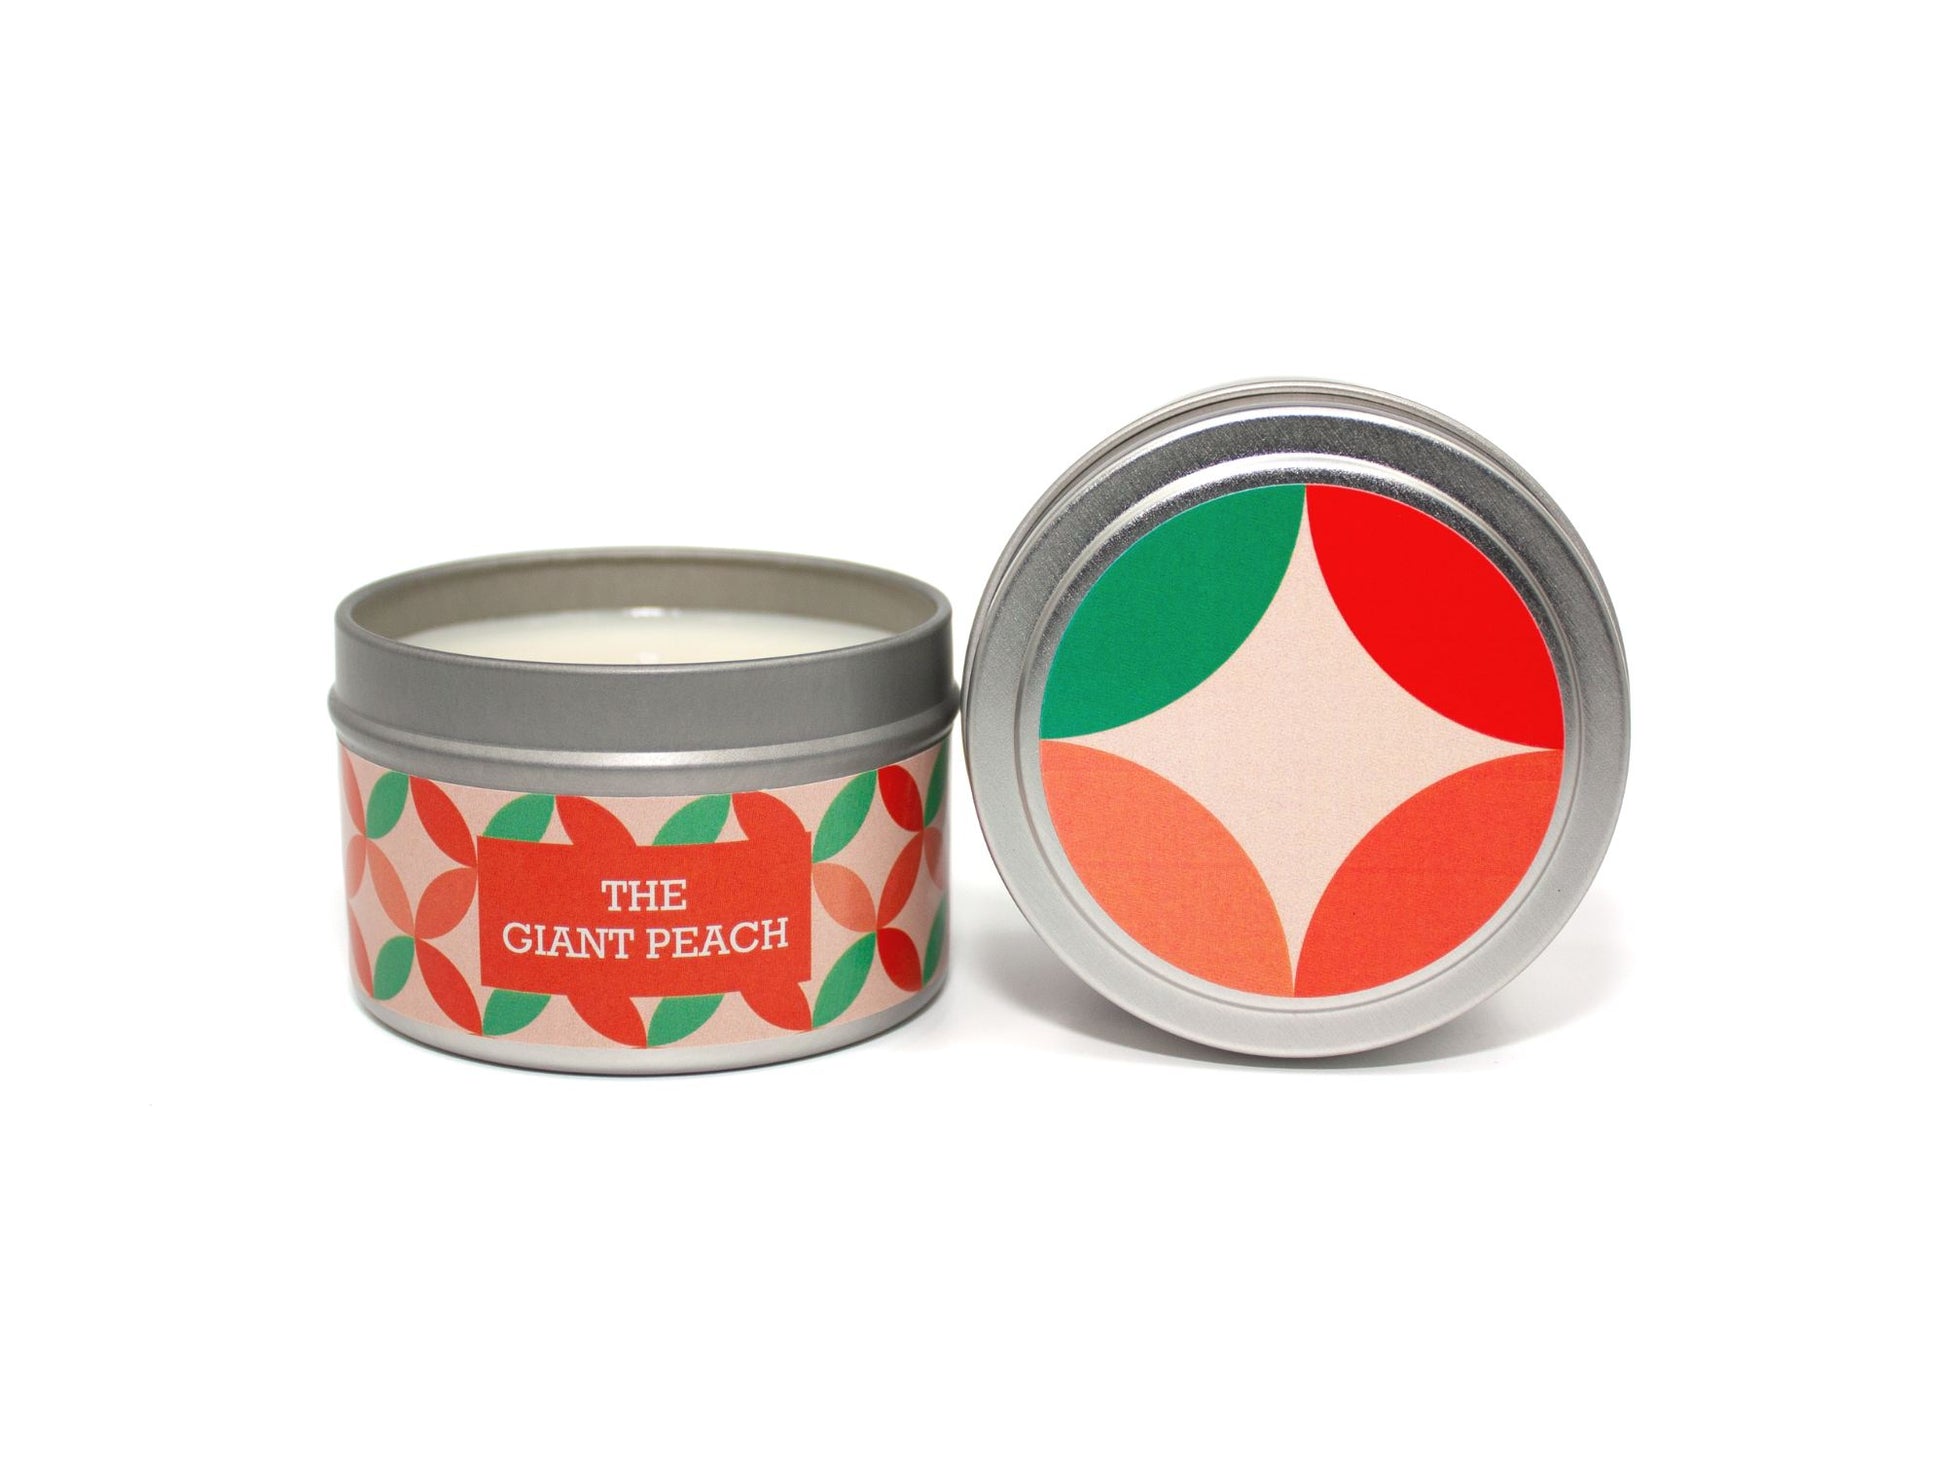 Onset & Rime fresh peach scented candle called "The Giant Peach" in a 4 oz silver tin. The circular label on top has a light peach background with a darker peach and green circular pattern. The text on the front label is "The Giant Peach - Fresh Peach, Lime Zest".